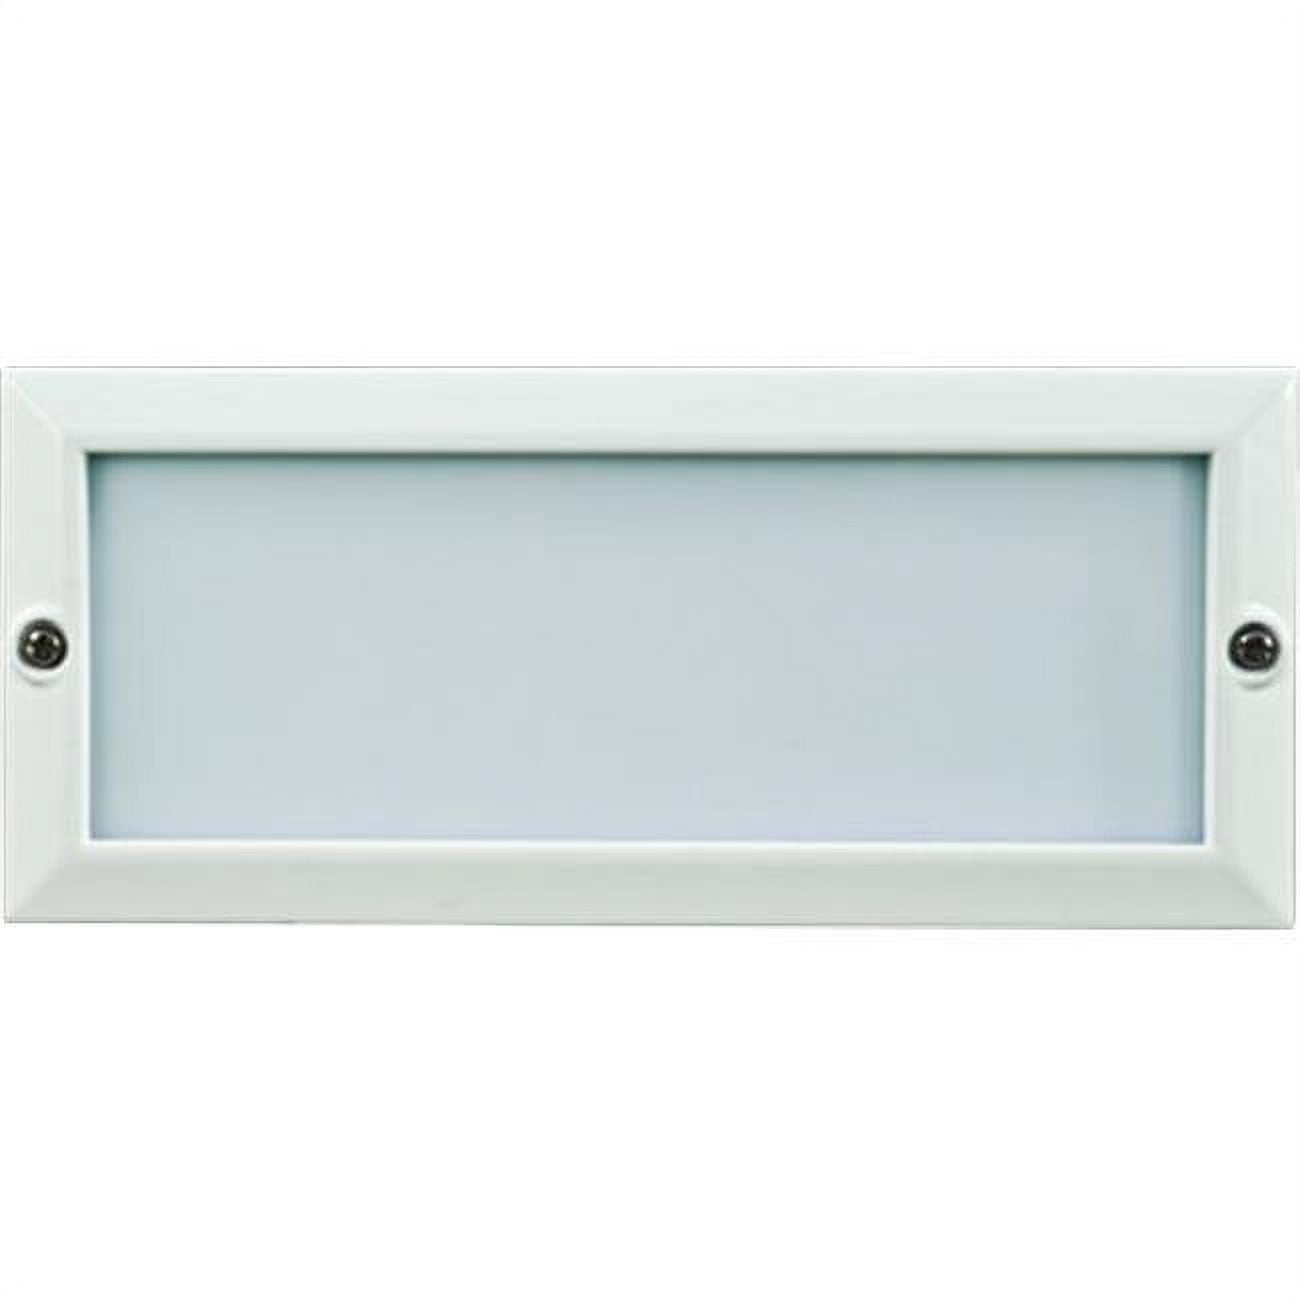 Picture of Dabmar Lighting LV602-W Cast Aluminum Recessed Open Face Brick, Step & Wall Light, White - 4 x 9.13 x 3.25 in.